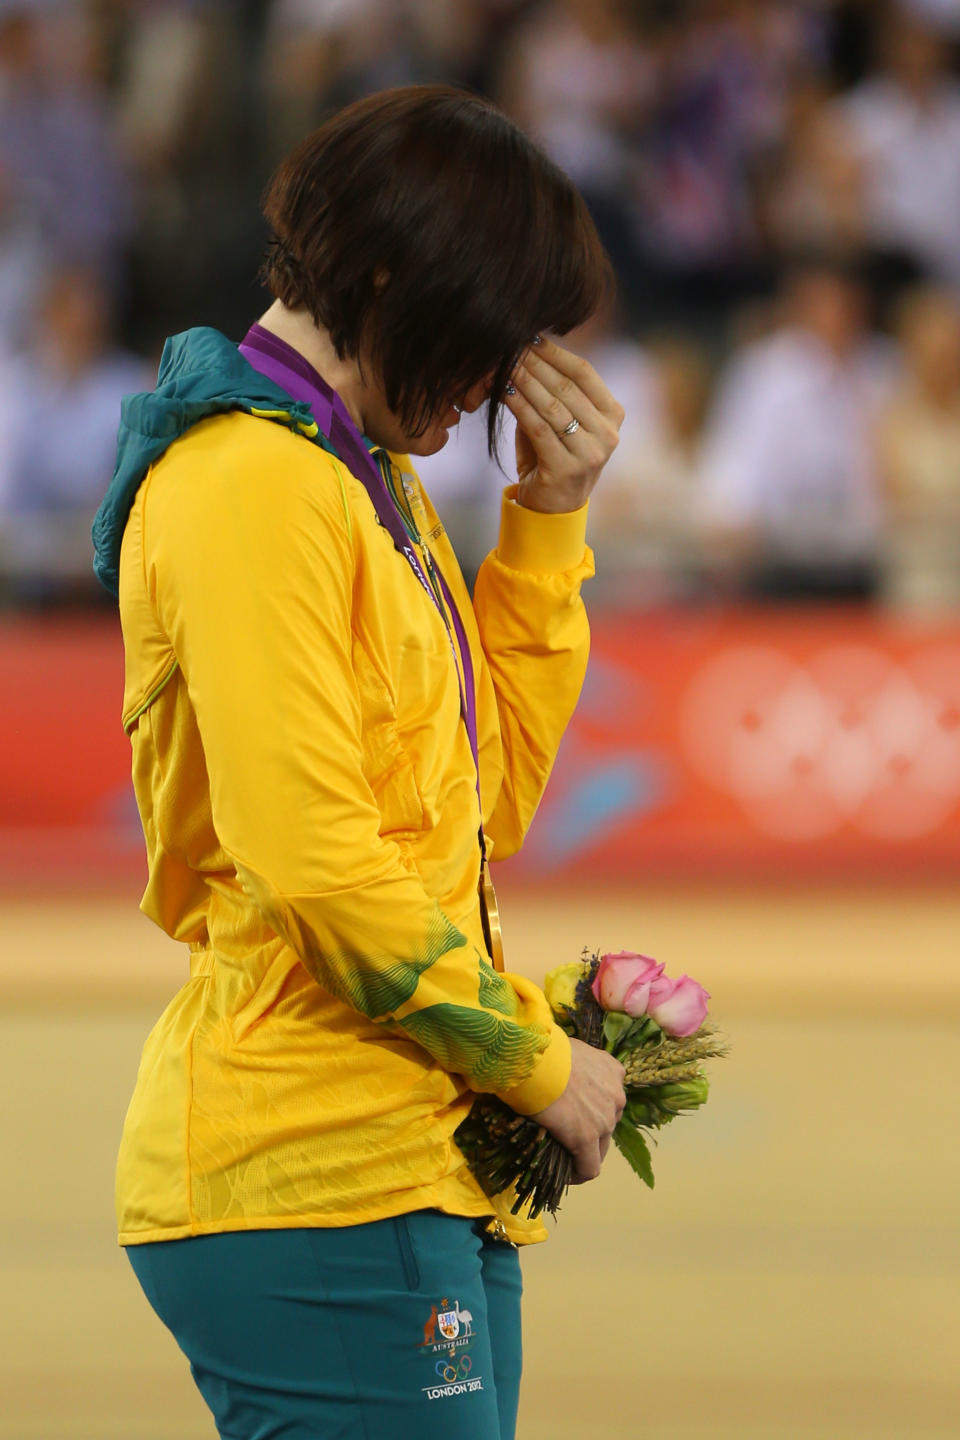 LONDON, ENGLAND - AUGUST 07: Gold medallist Anna Meares of Australia celebrates during the medal ceremony for the Women's Sprint Track Cycling Final on Day 11 of the London 2012 Olympic Games at Velodrome on August 7, 2012 in London, England. (Photo by Phil Walter/Getty Images)